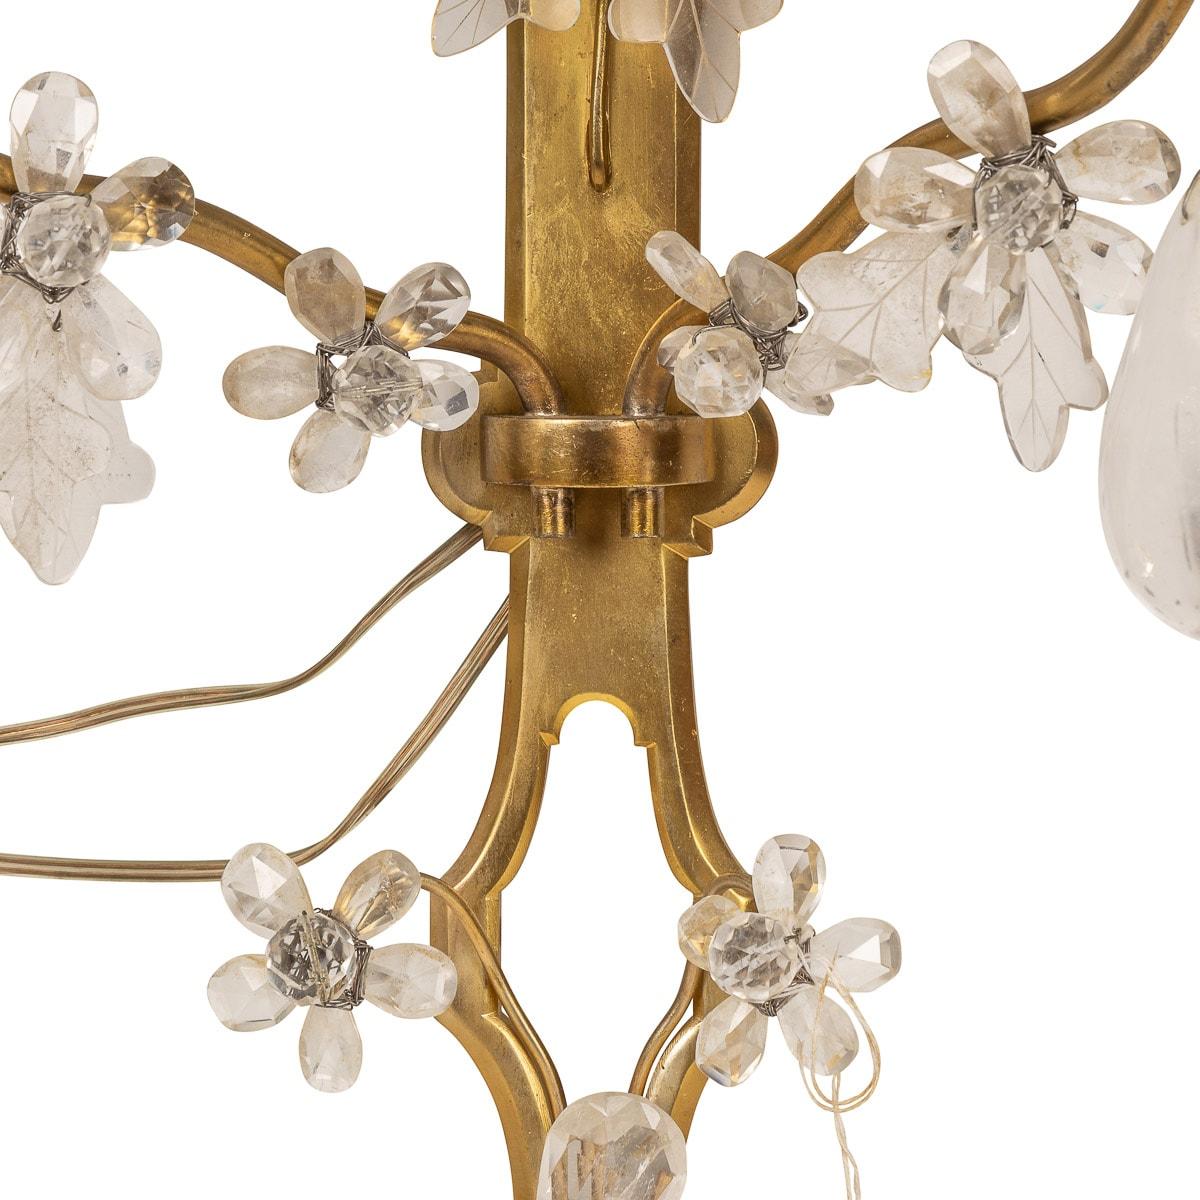 20th Century French Baroque Style D'appliques Wall Lights, Maison Bagues, c.1900 For Sale 3